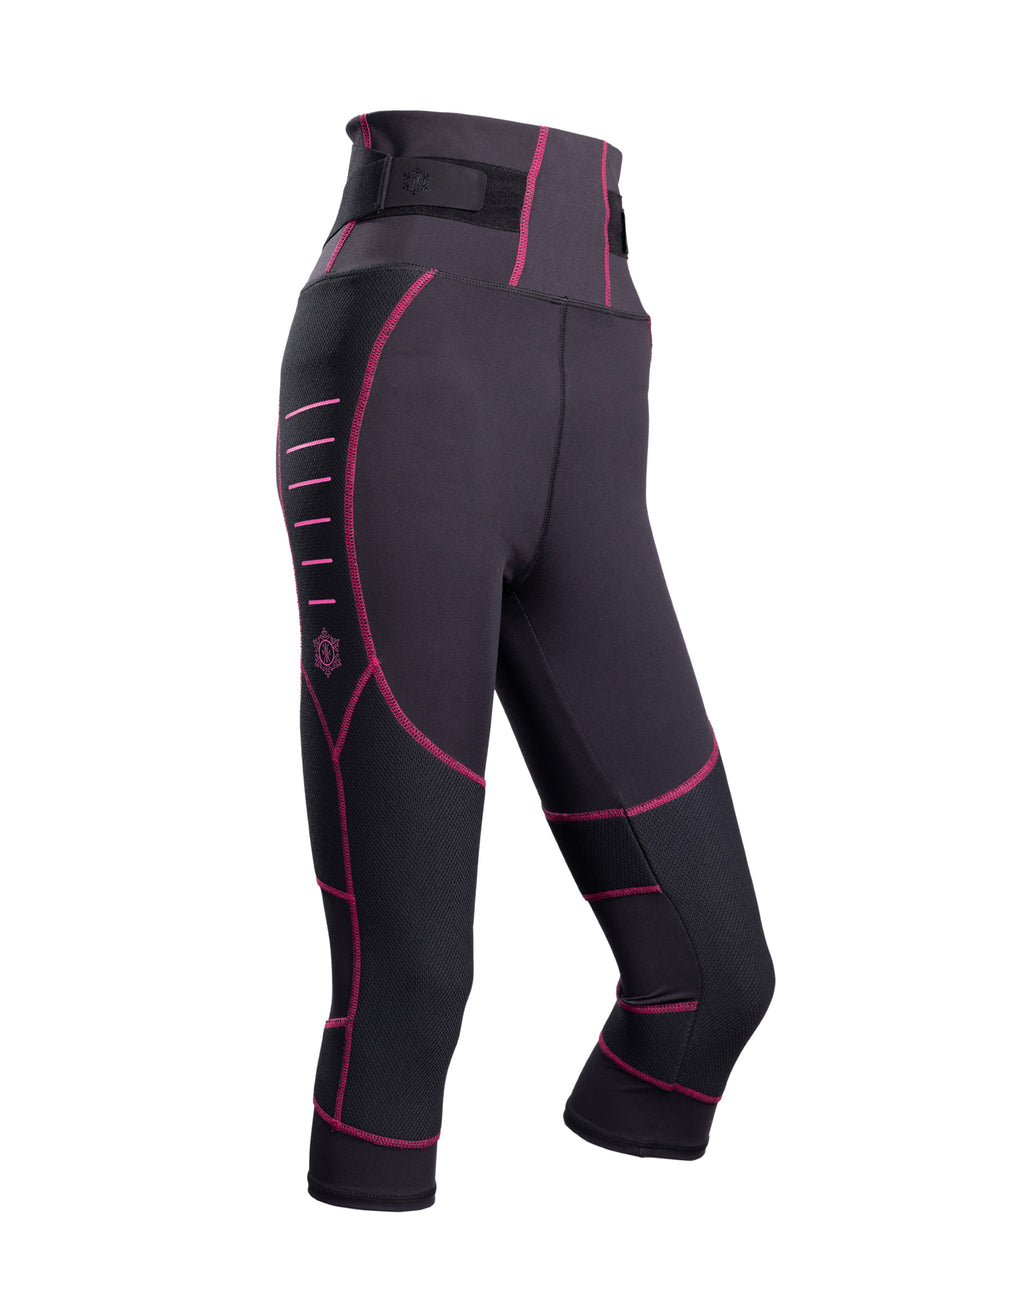 Buy The High-Waisted & Workout Leggings For Women – La Patricia Fashion